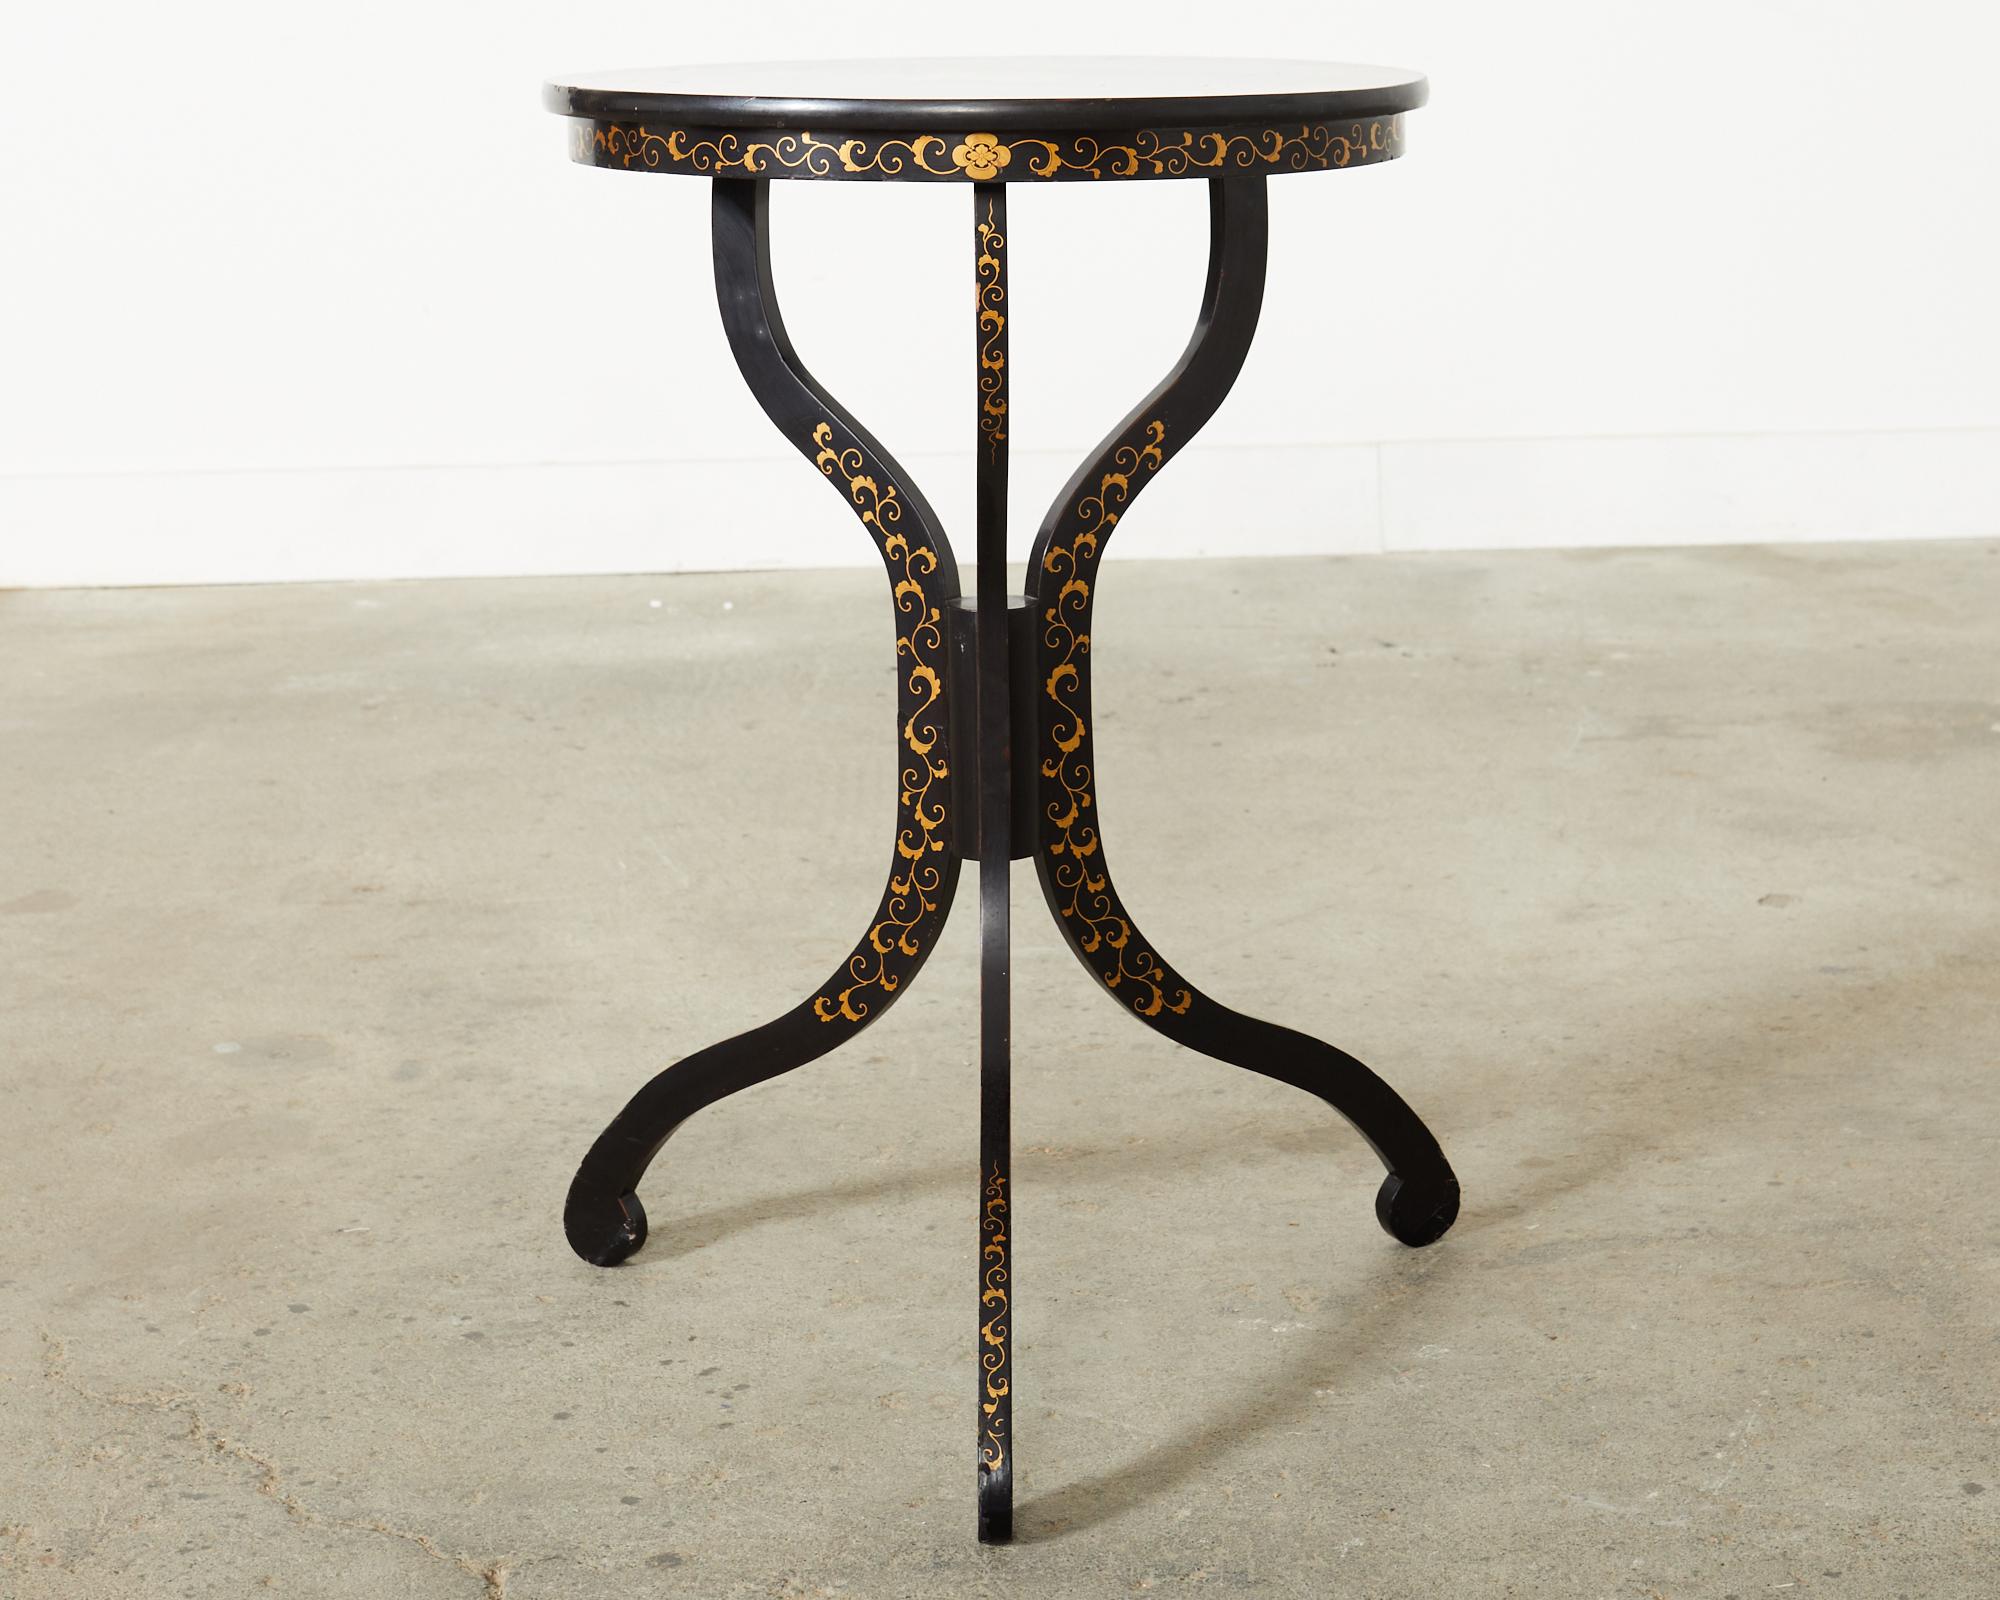 Japonisme Lacquer Round Occasional Table Parcel Gilt Decoration In Distressed Condition For Sale In Rio Vista, CA